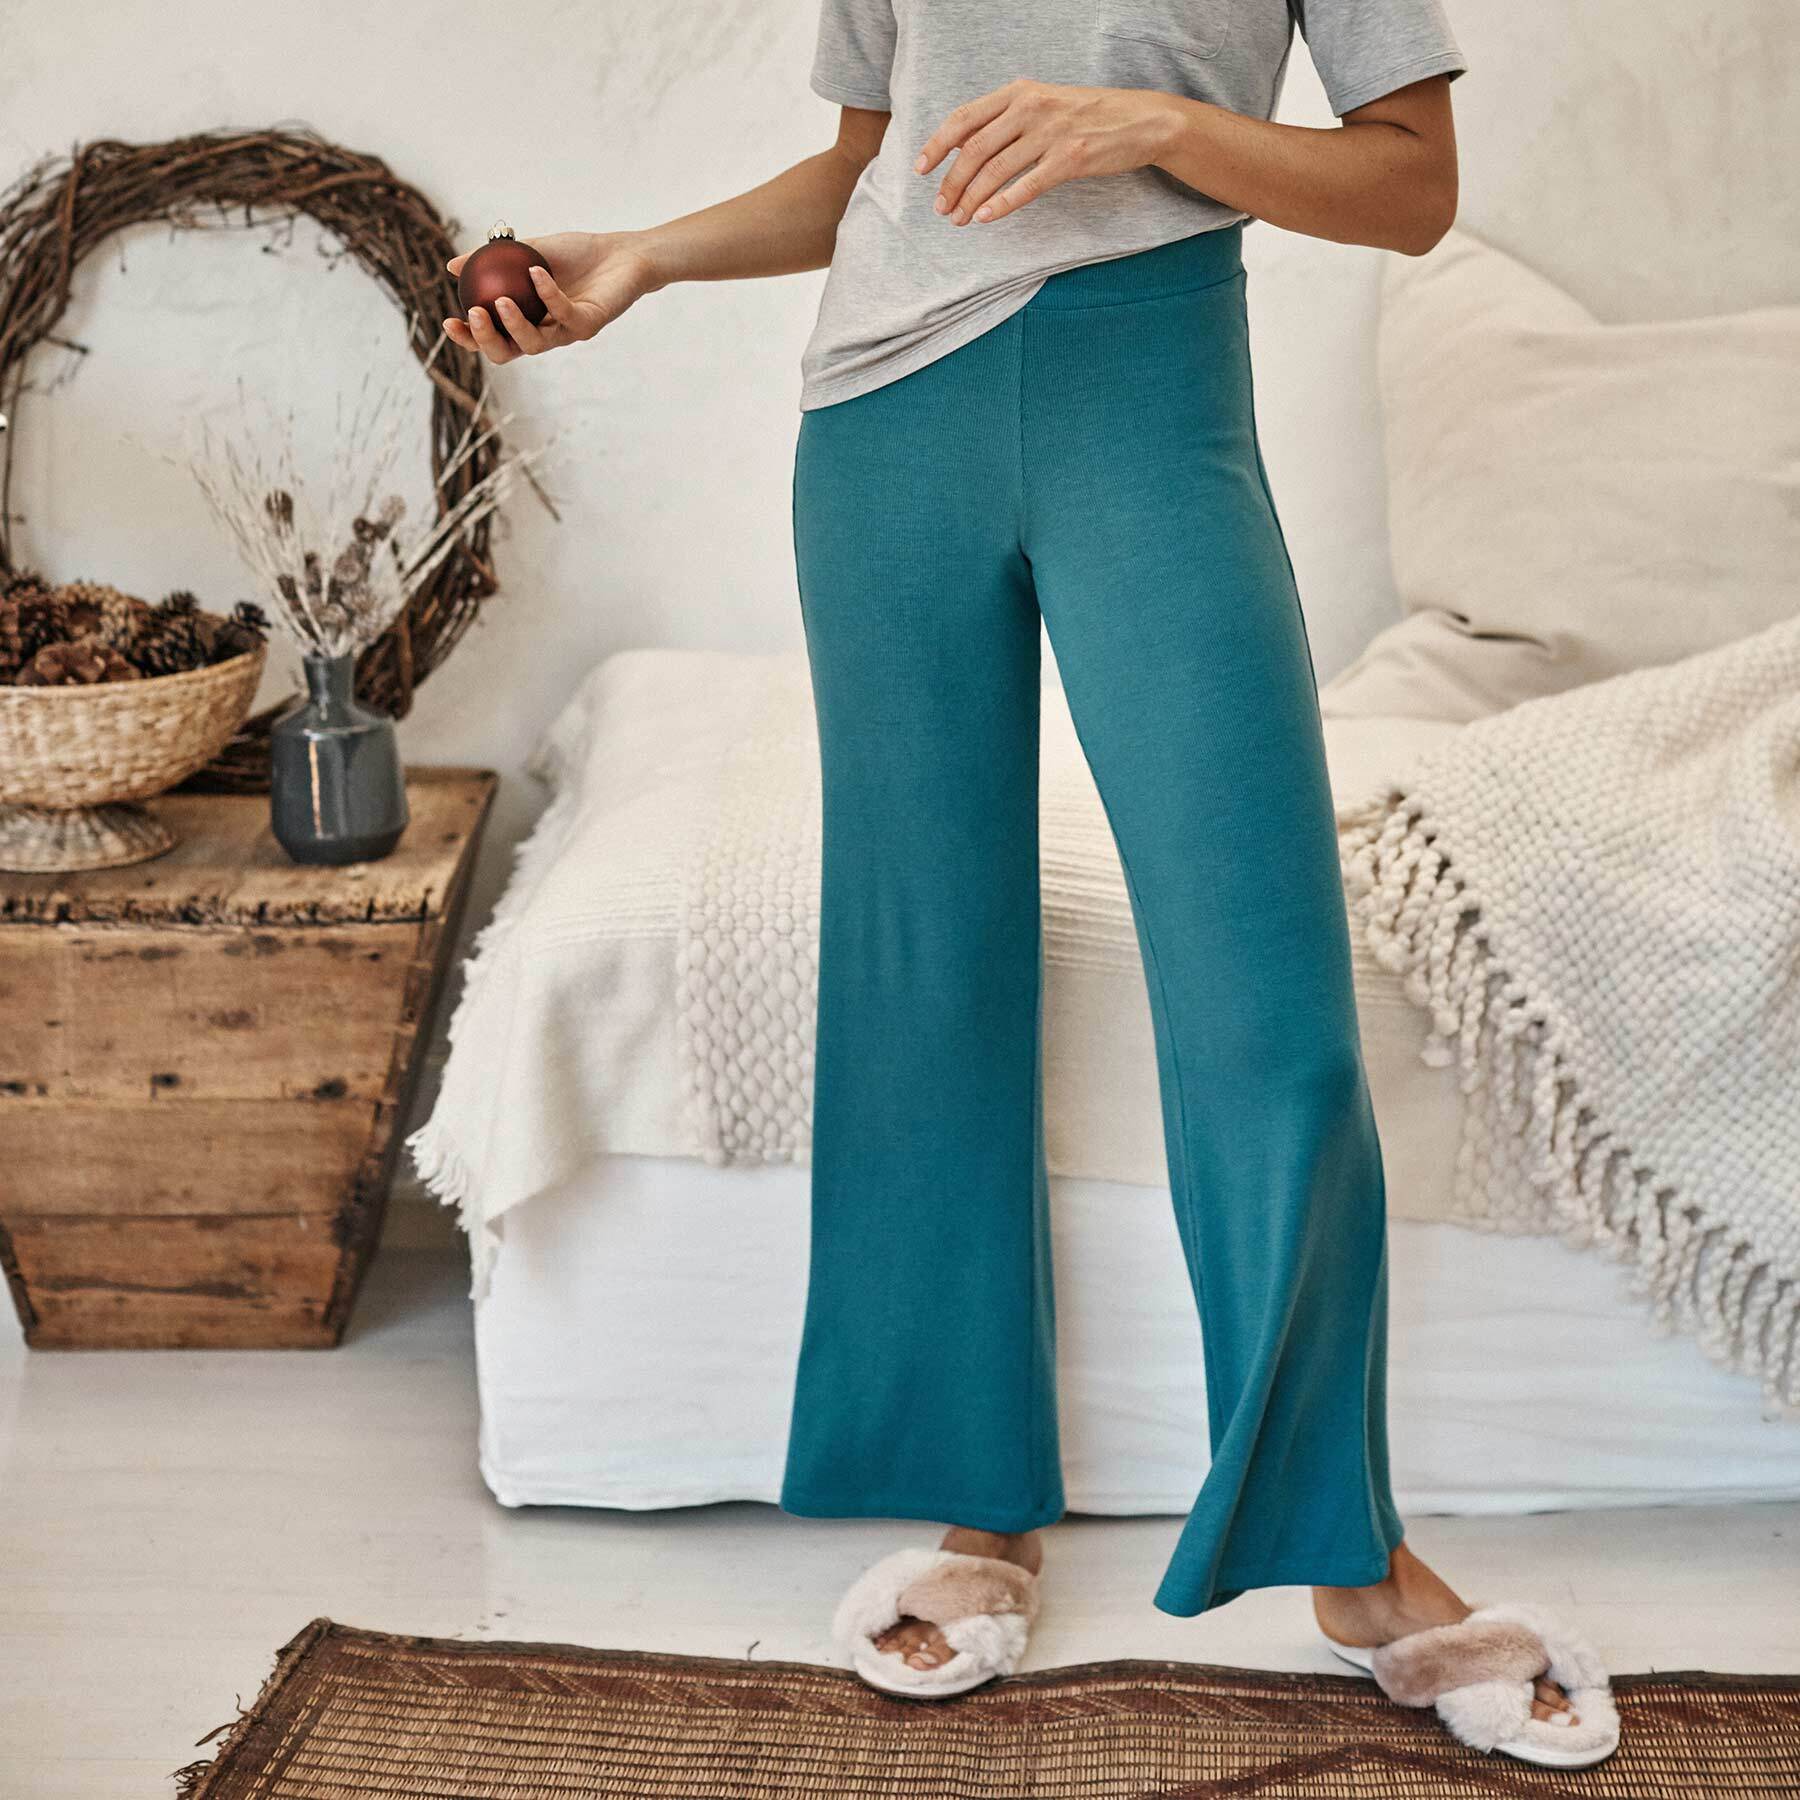 Beach Vibes On Fleek: Cute Summer Pants For A Breezy Outfit